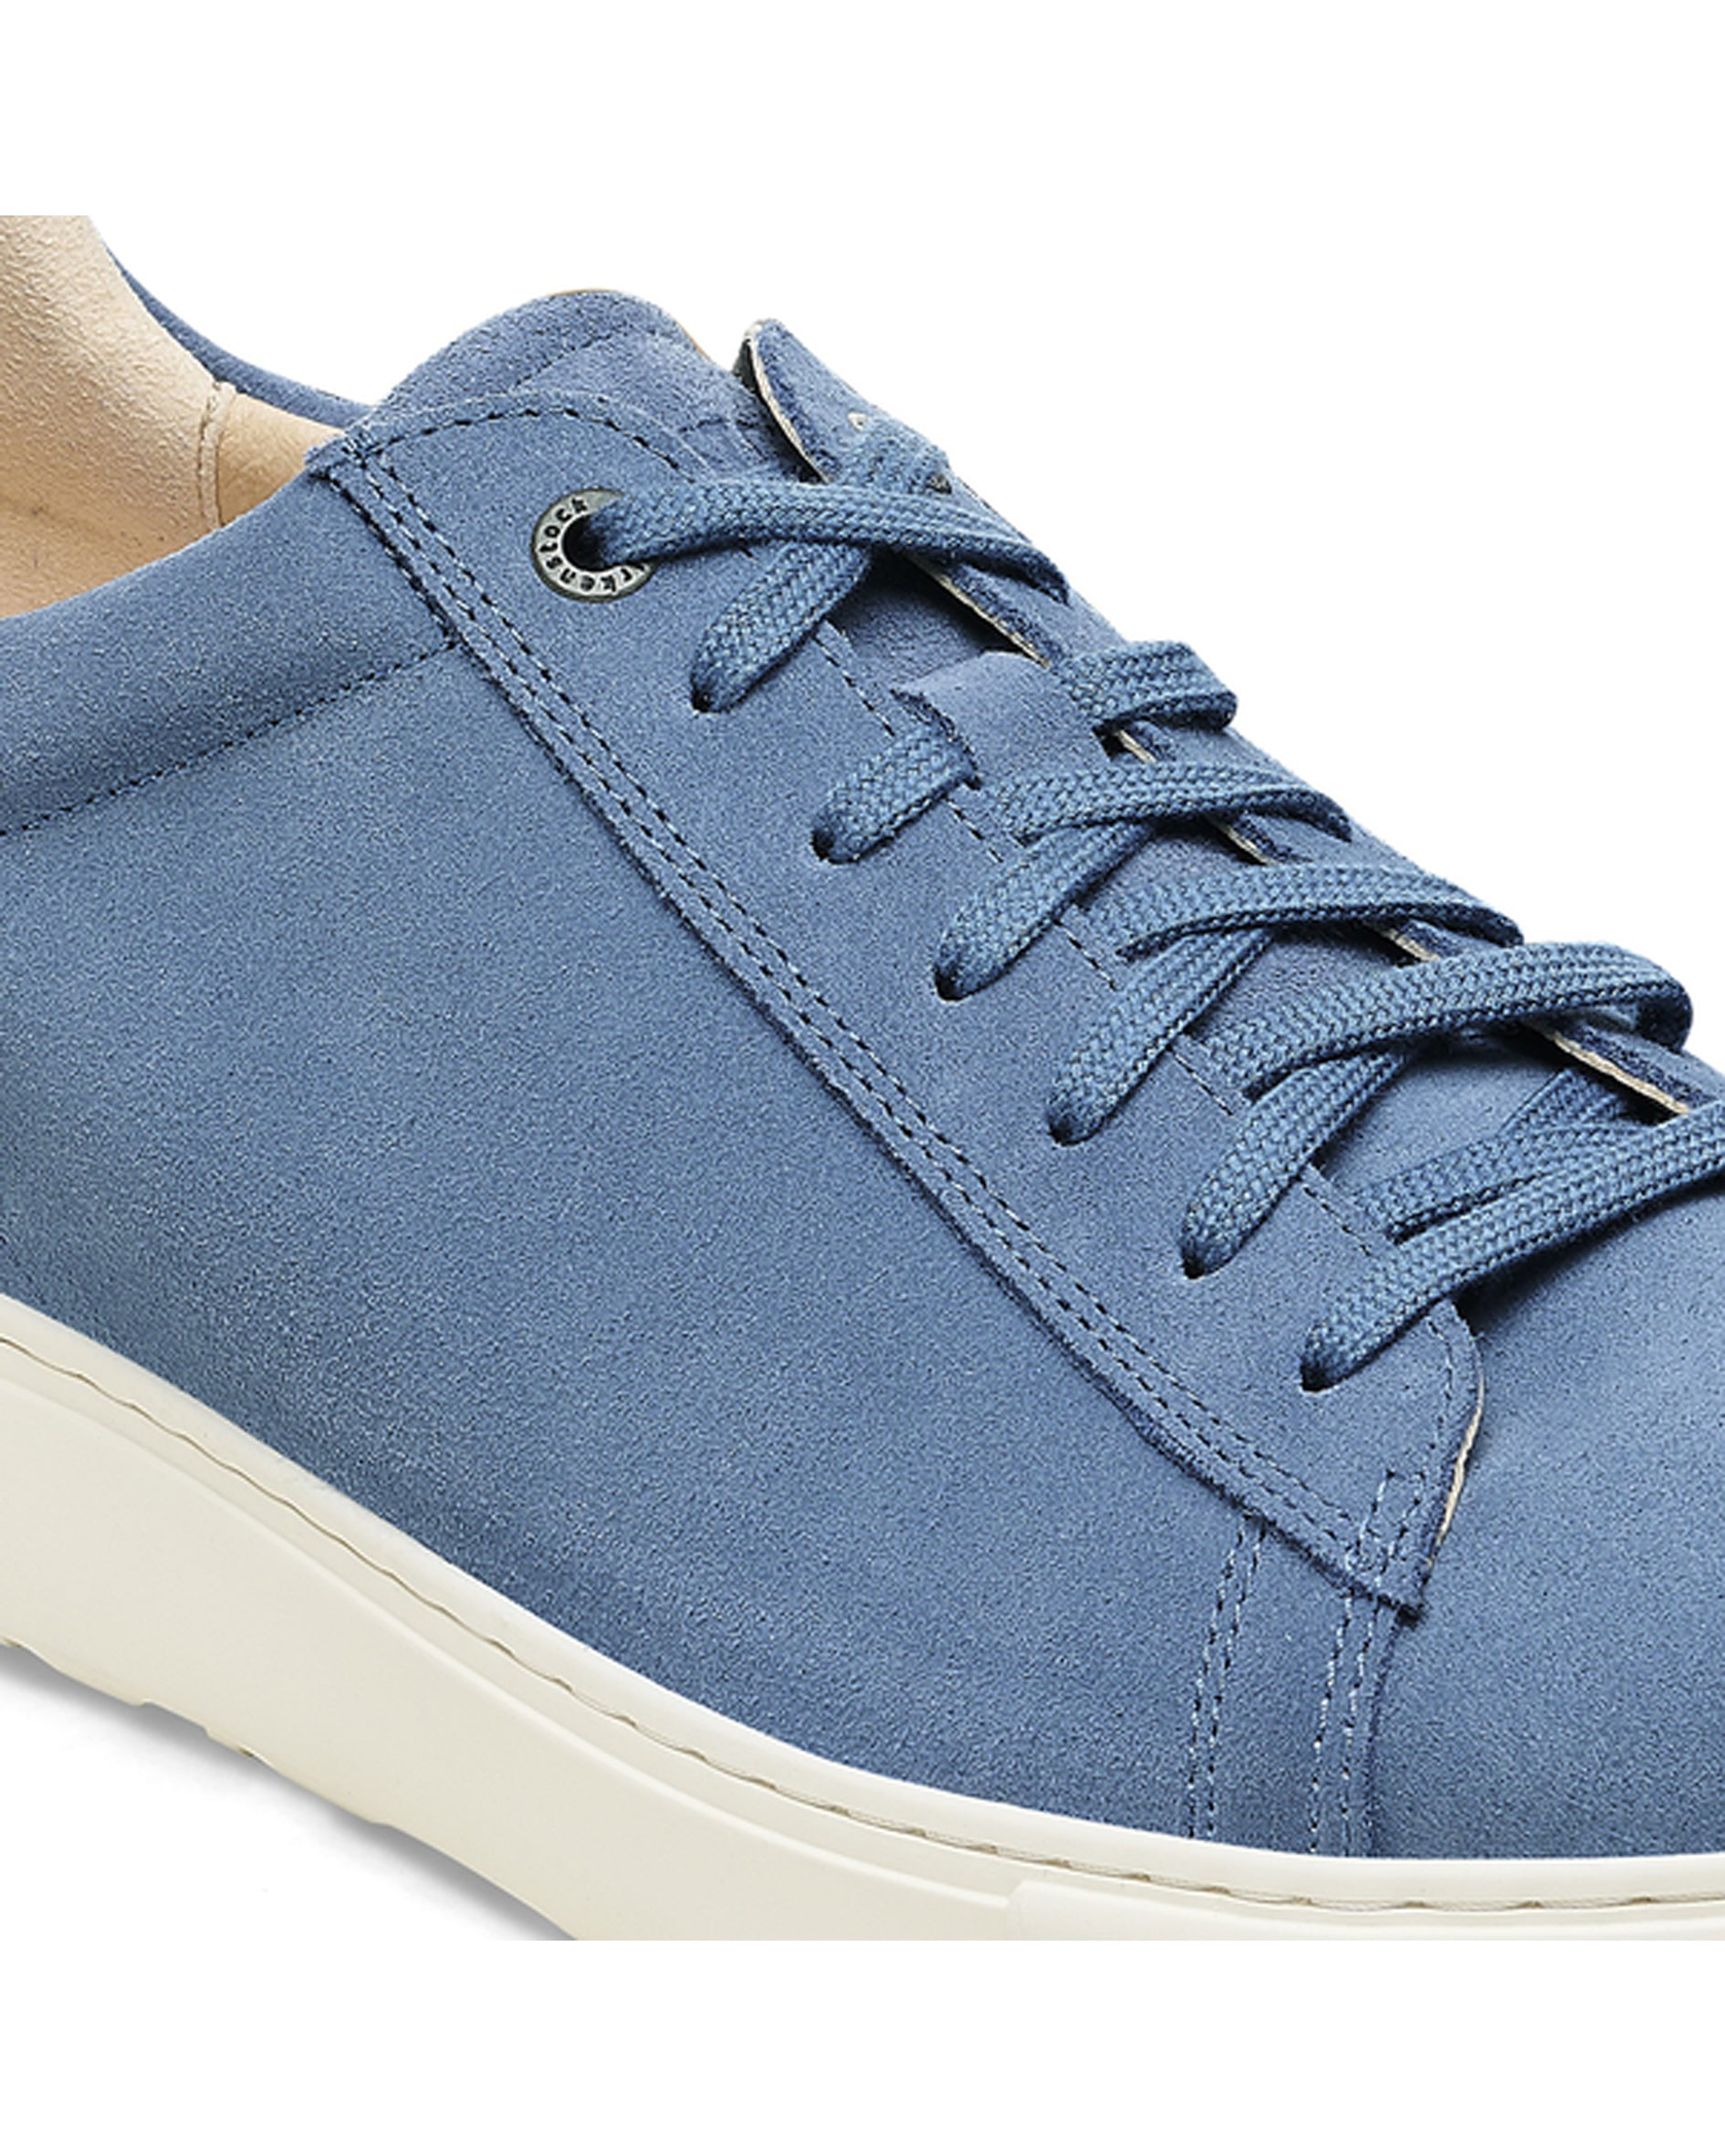 Bend Low Elemental Blue Suede Leather Shoes